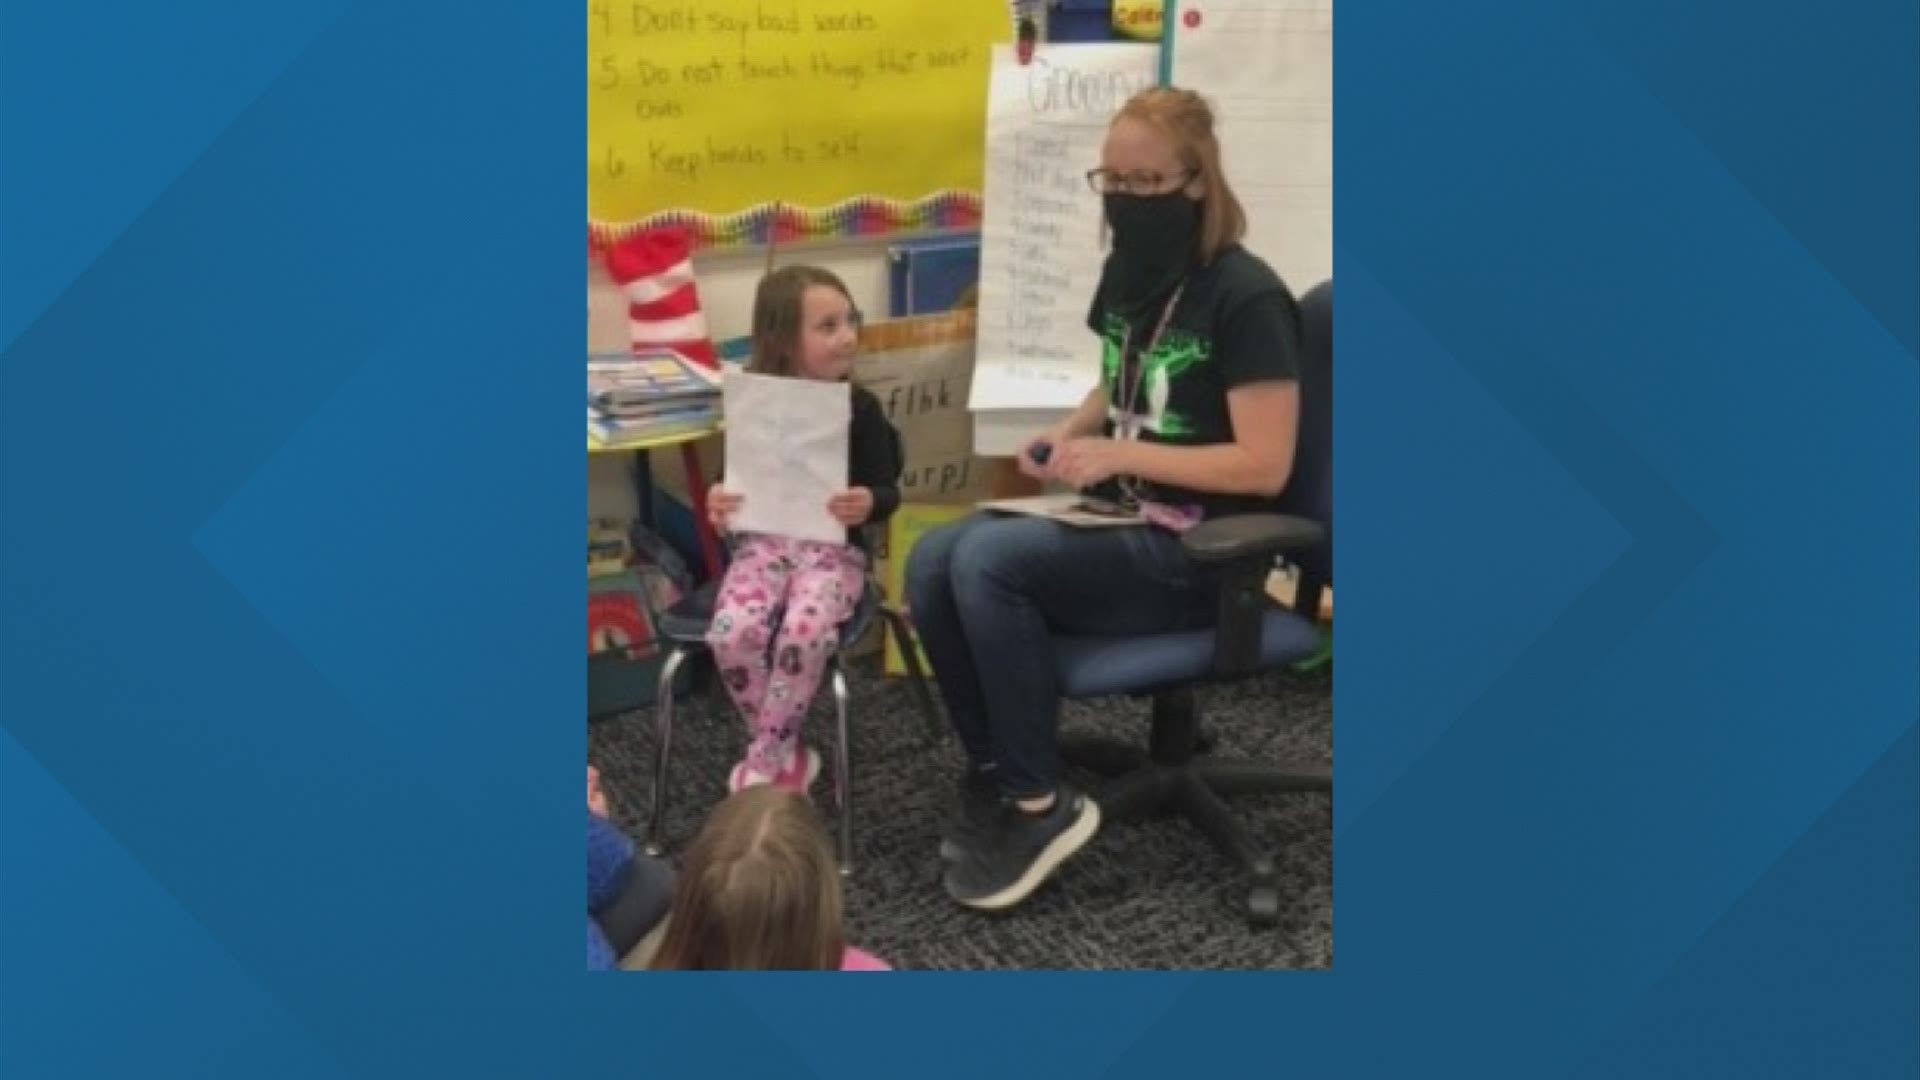 Brooke Phipps is a kindergarten teacher at North Union Elementary School, and she is this week's Classroom Hero.